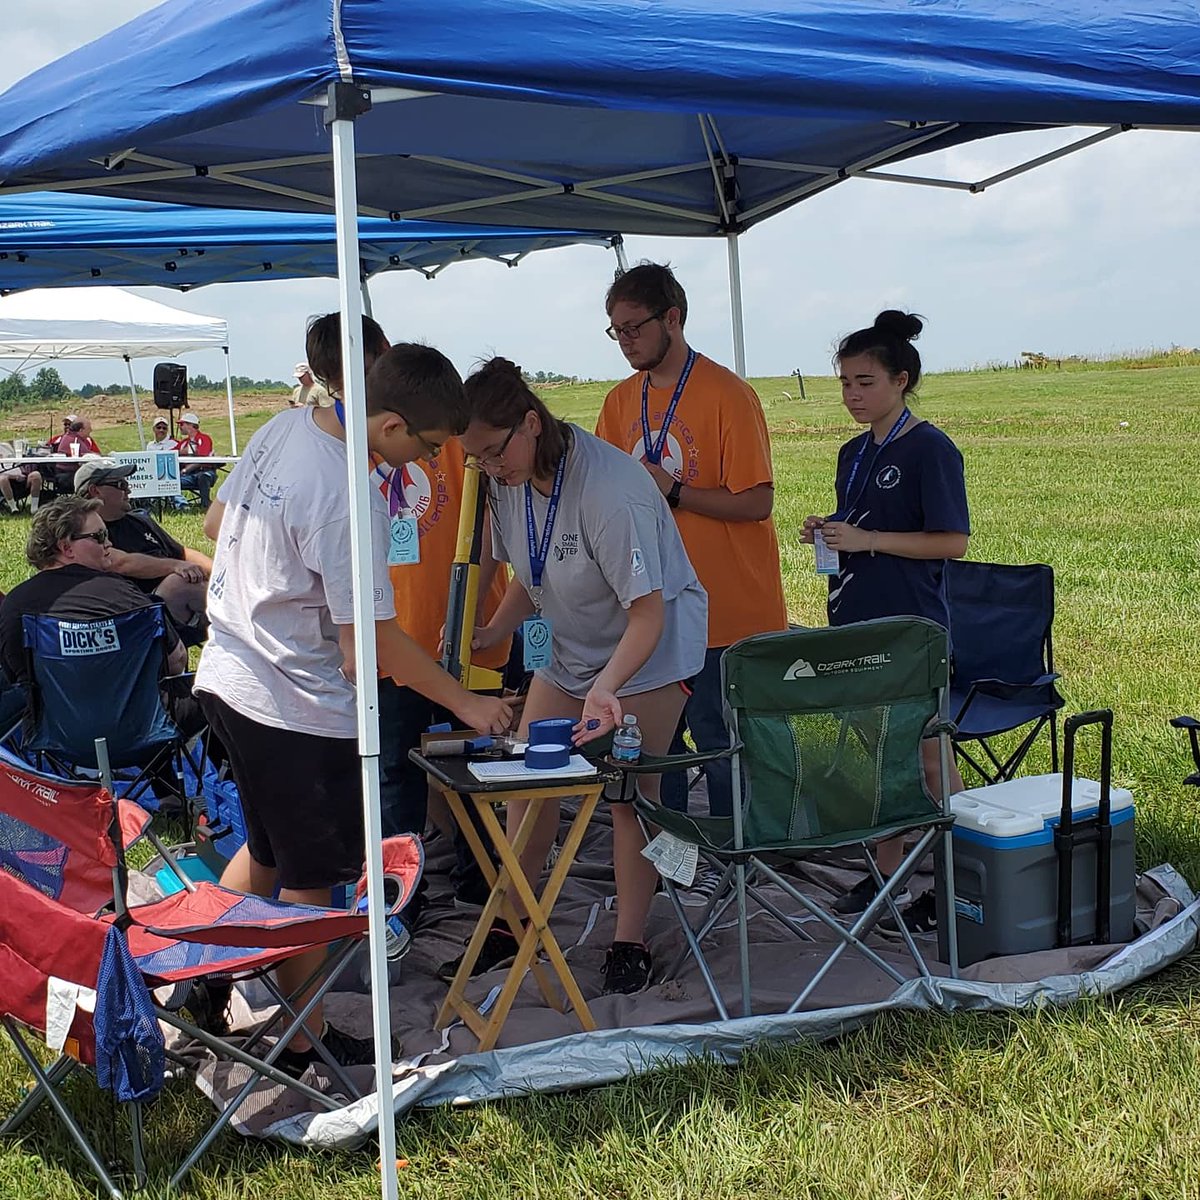 Setting up for our first #tarc21 Nationals flight. #rocketcontest #lincolnrocketry #morphiapp